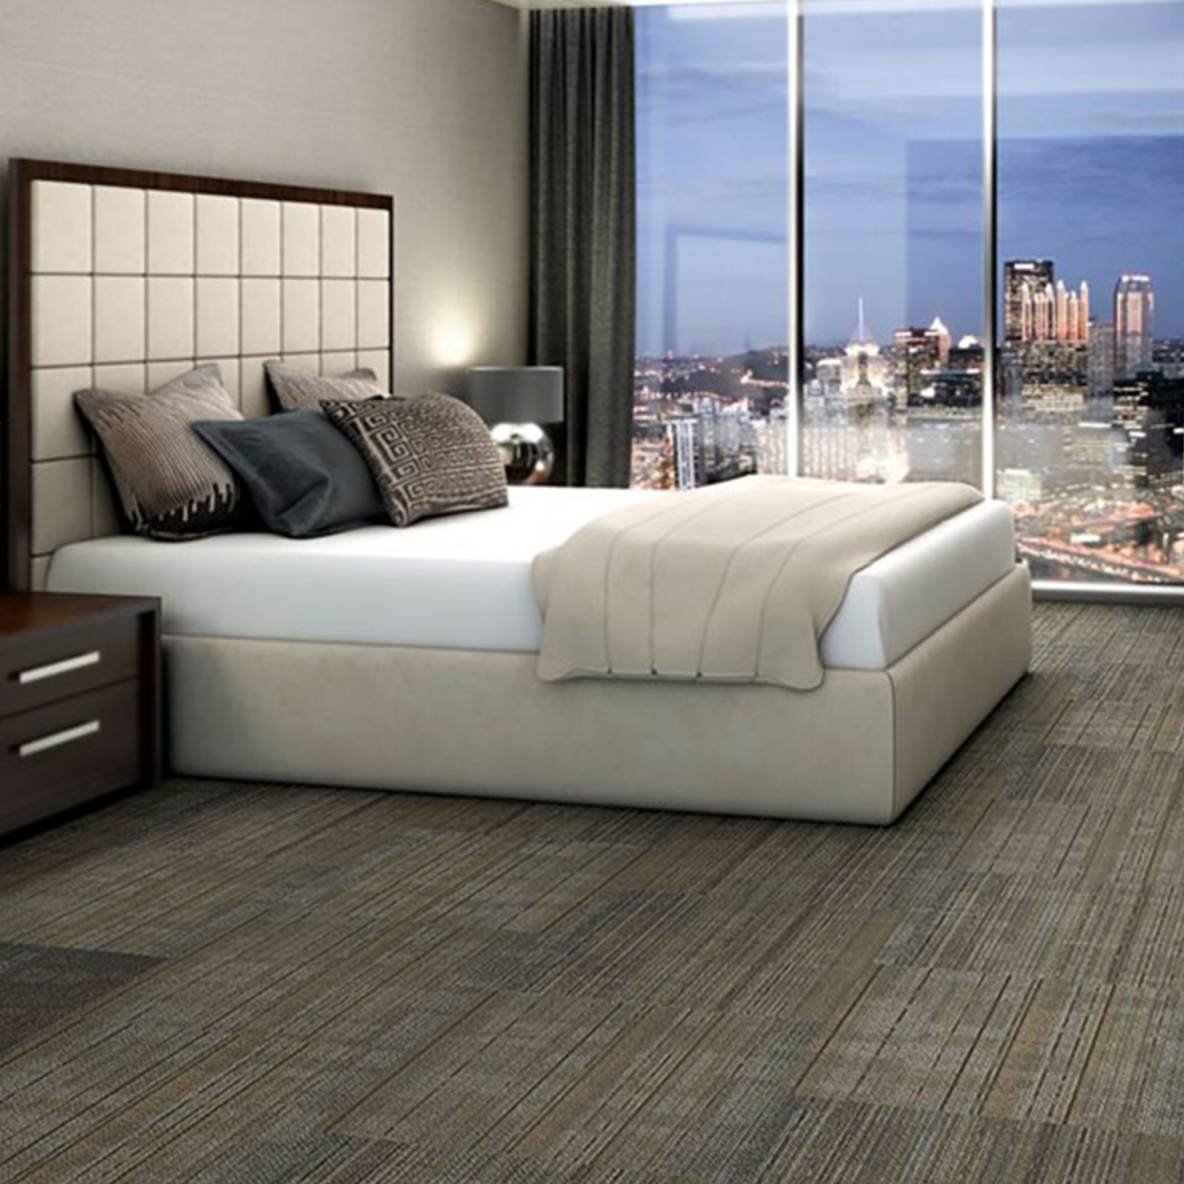 Out of Bounds Commercial Carpet Tile .25 Inch x 2x2 Ft. 13 per Carton Hotel Room with Blend color